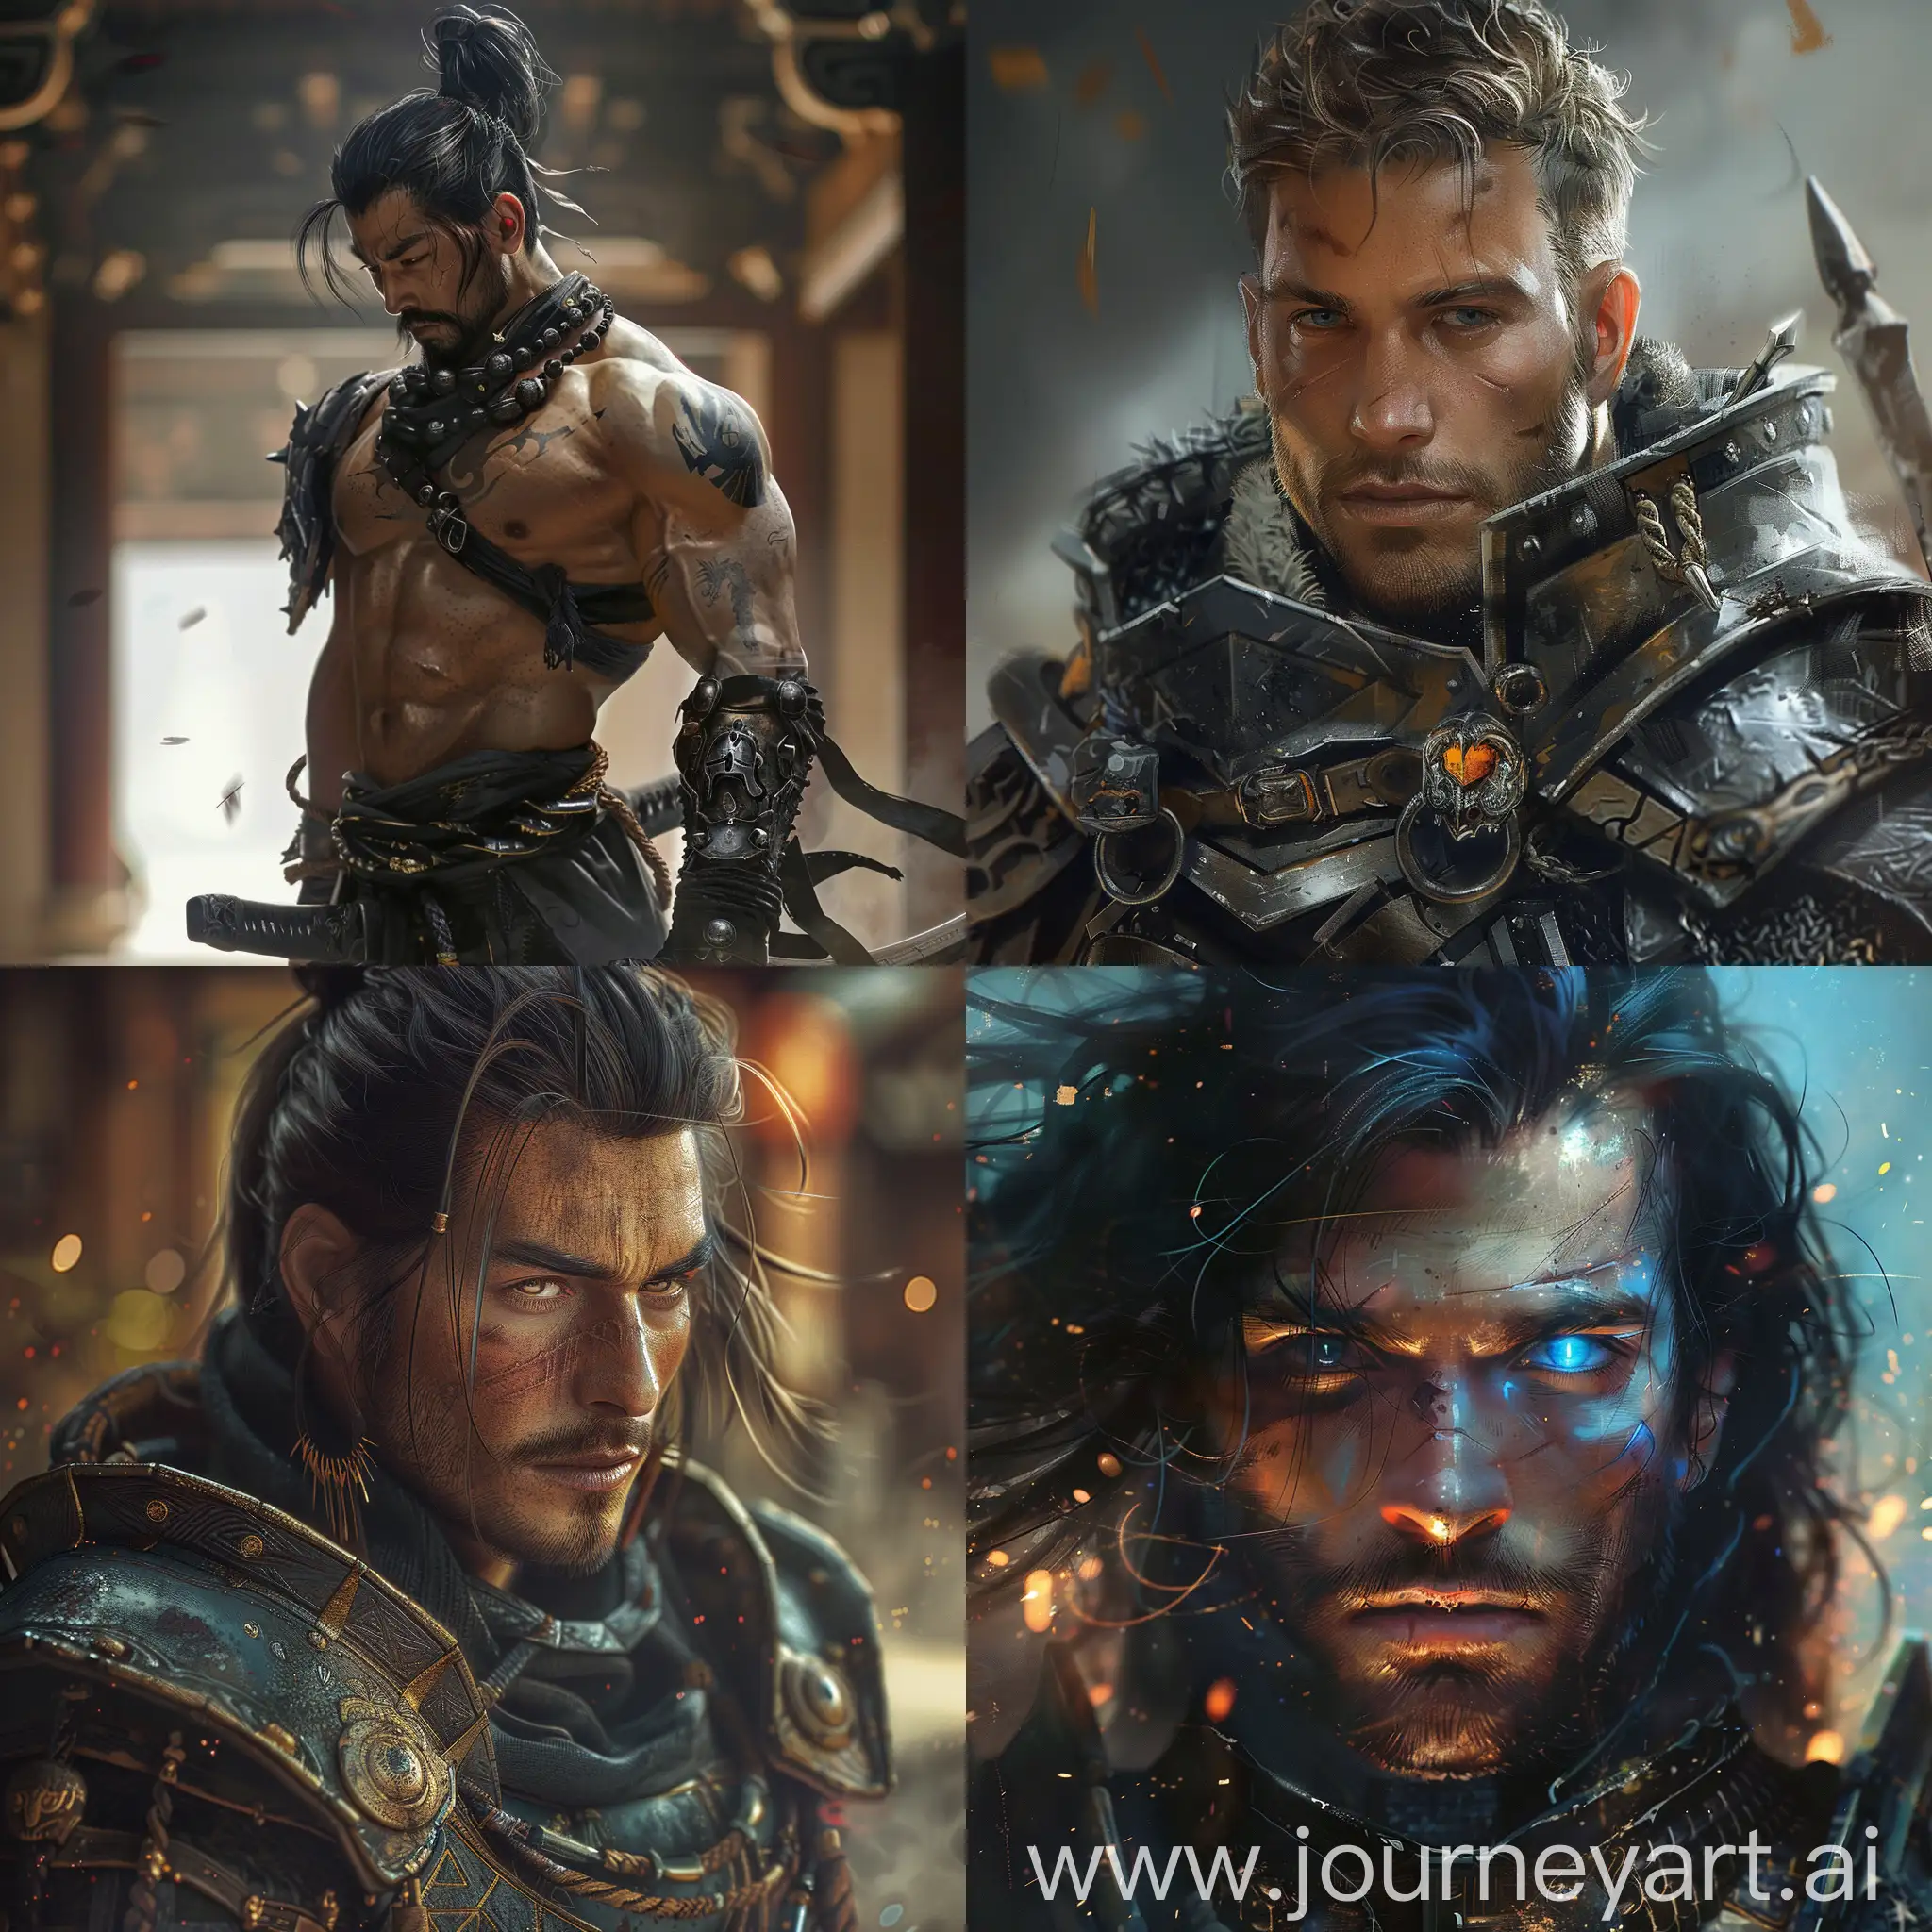 Realistic and beautiful man warrior in future